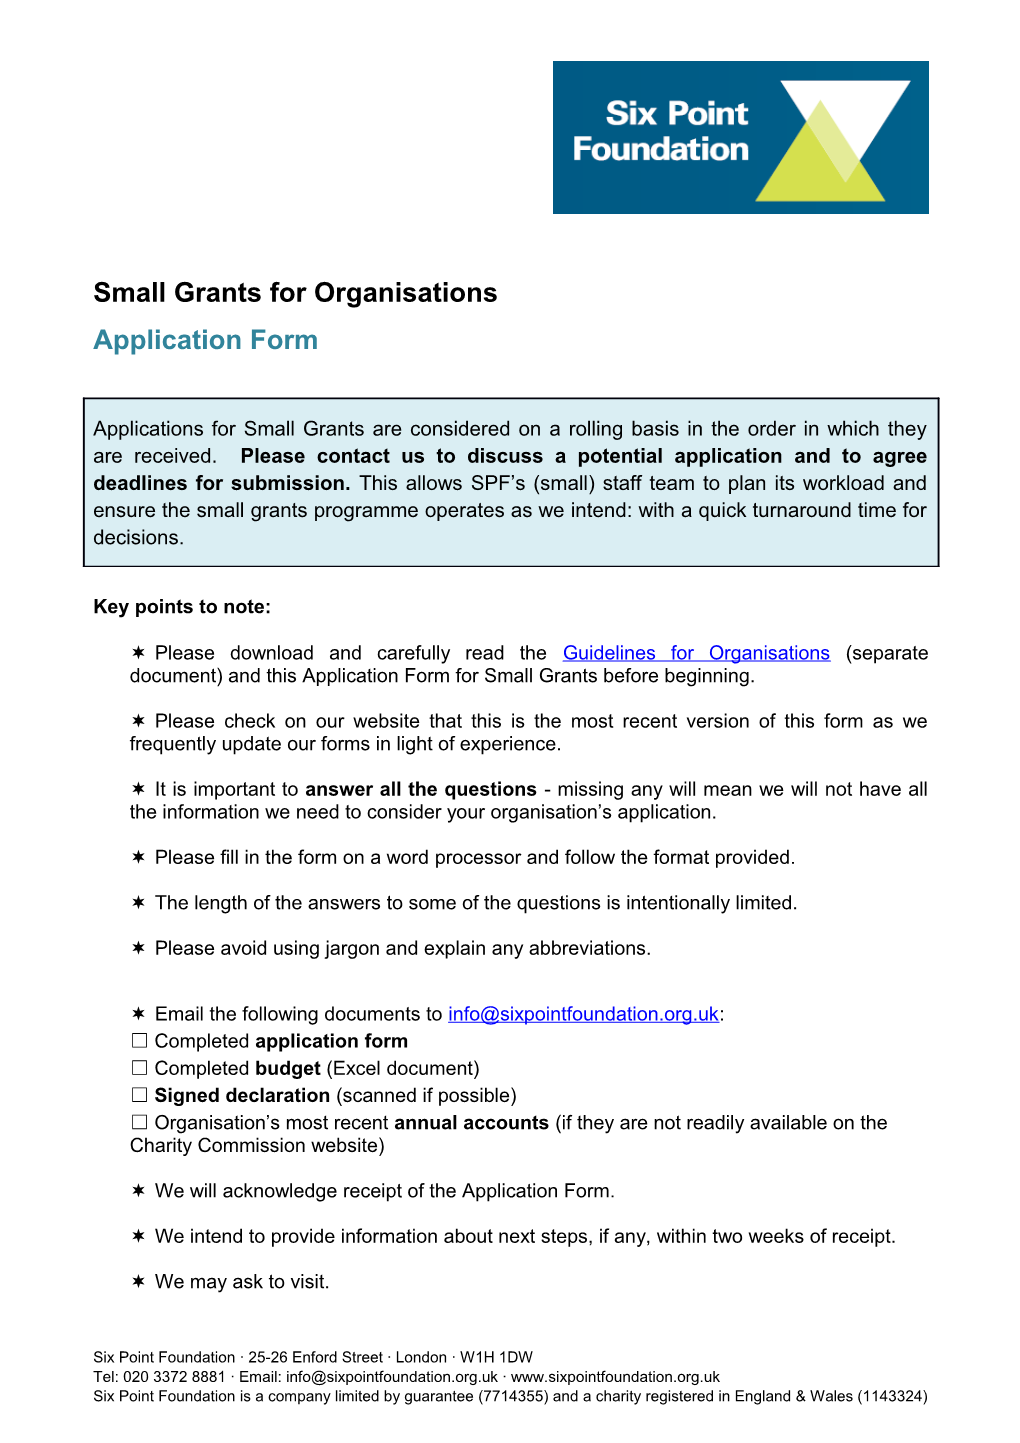 Small Grants to Organisations Application Form V1 Page 2 of 6